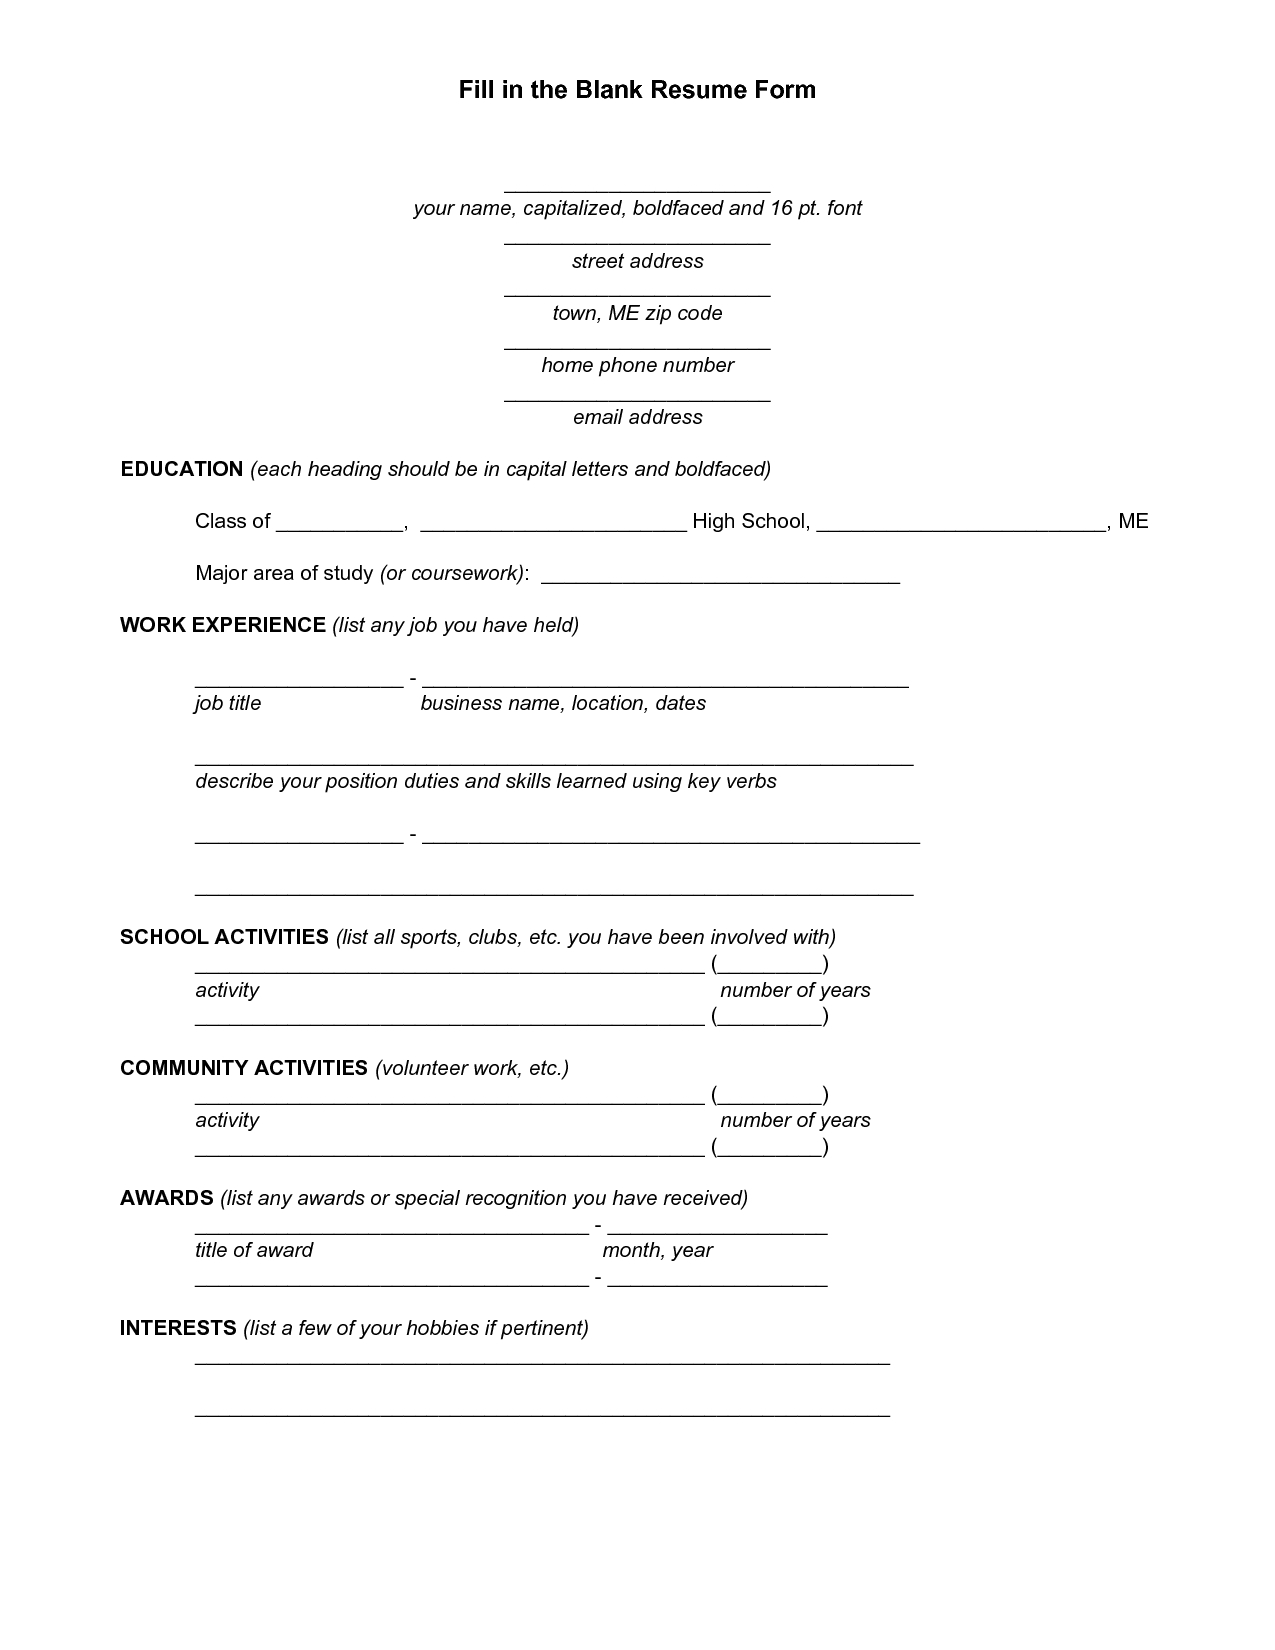 You Can Fill In Student Resume Template Resume Form Free within size 1275 X 1650